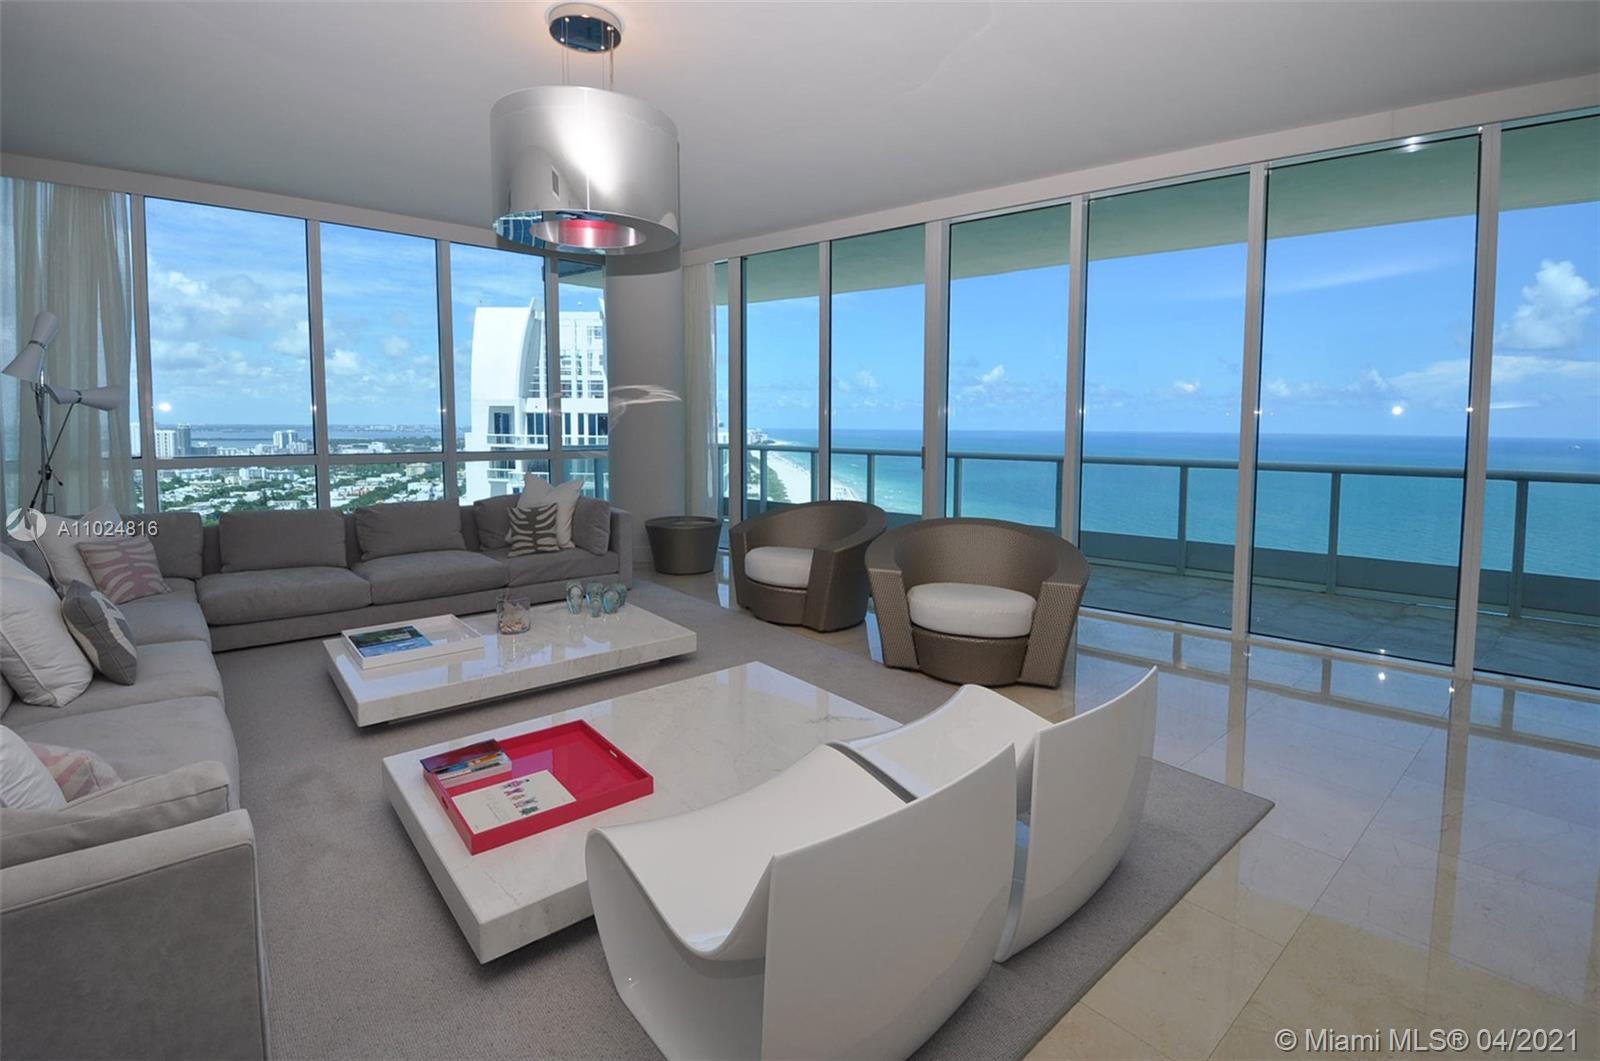 One of the best corner, direct ocean apartments at The Continuum in South Beach.  And, way up high on the 36th floor! This 2 Bed, 2½ Bath luxury apartment offers over 2000 sqft of luxury living space, with floor-to-ceiling windows, a very spacious private terrace and probably some of the best beach views you will ever see.  The split floor-plan has direct East and direct North views, with spacious bedrooms and a grand living area.  The Continuum is a private and gated community in the SoFi district of Miami Beach, and offers a private beach club, onsite restaurant, world-class health club, tennis courts and more.  It is just a few blocks from Joe's Stone Crab, Prime 112 and a host of other extraordinary dining experiences.